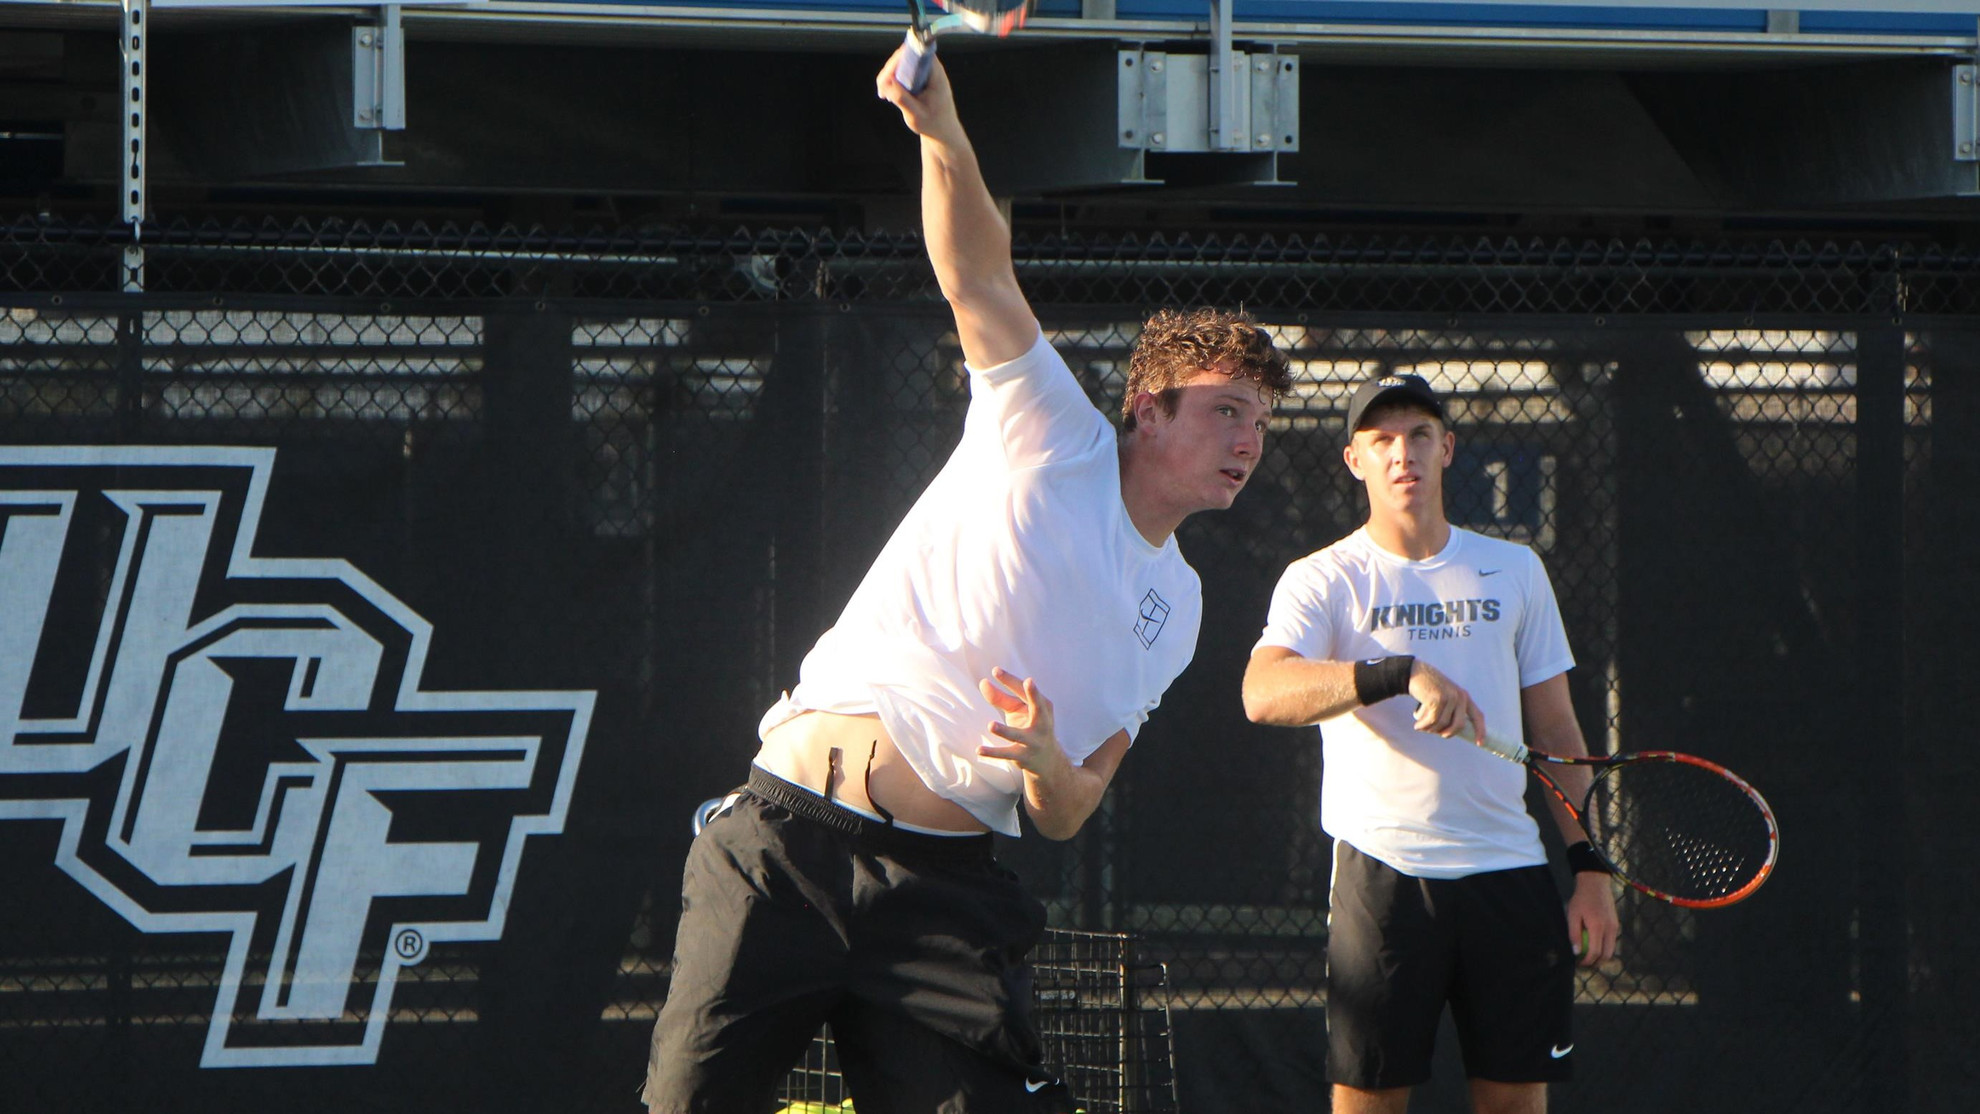 Decamps Qualifies for Futures Main Draw - UCF Athletics